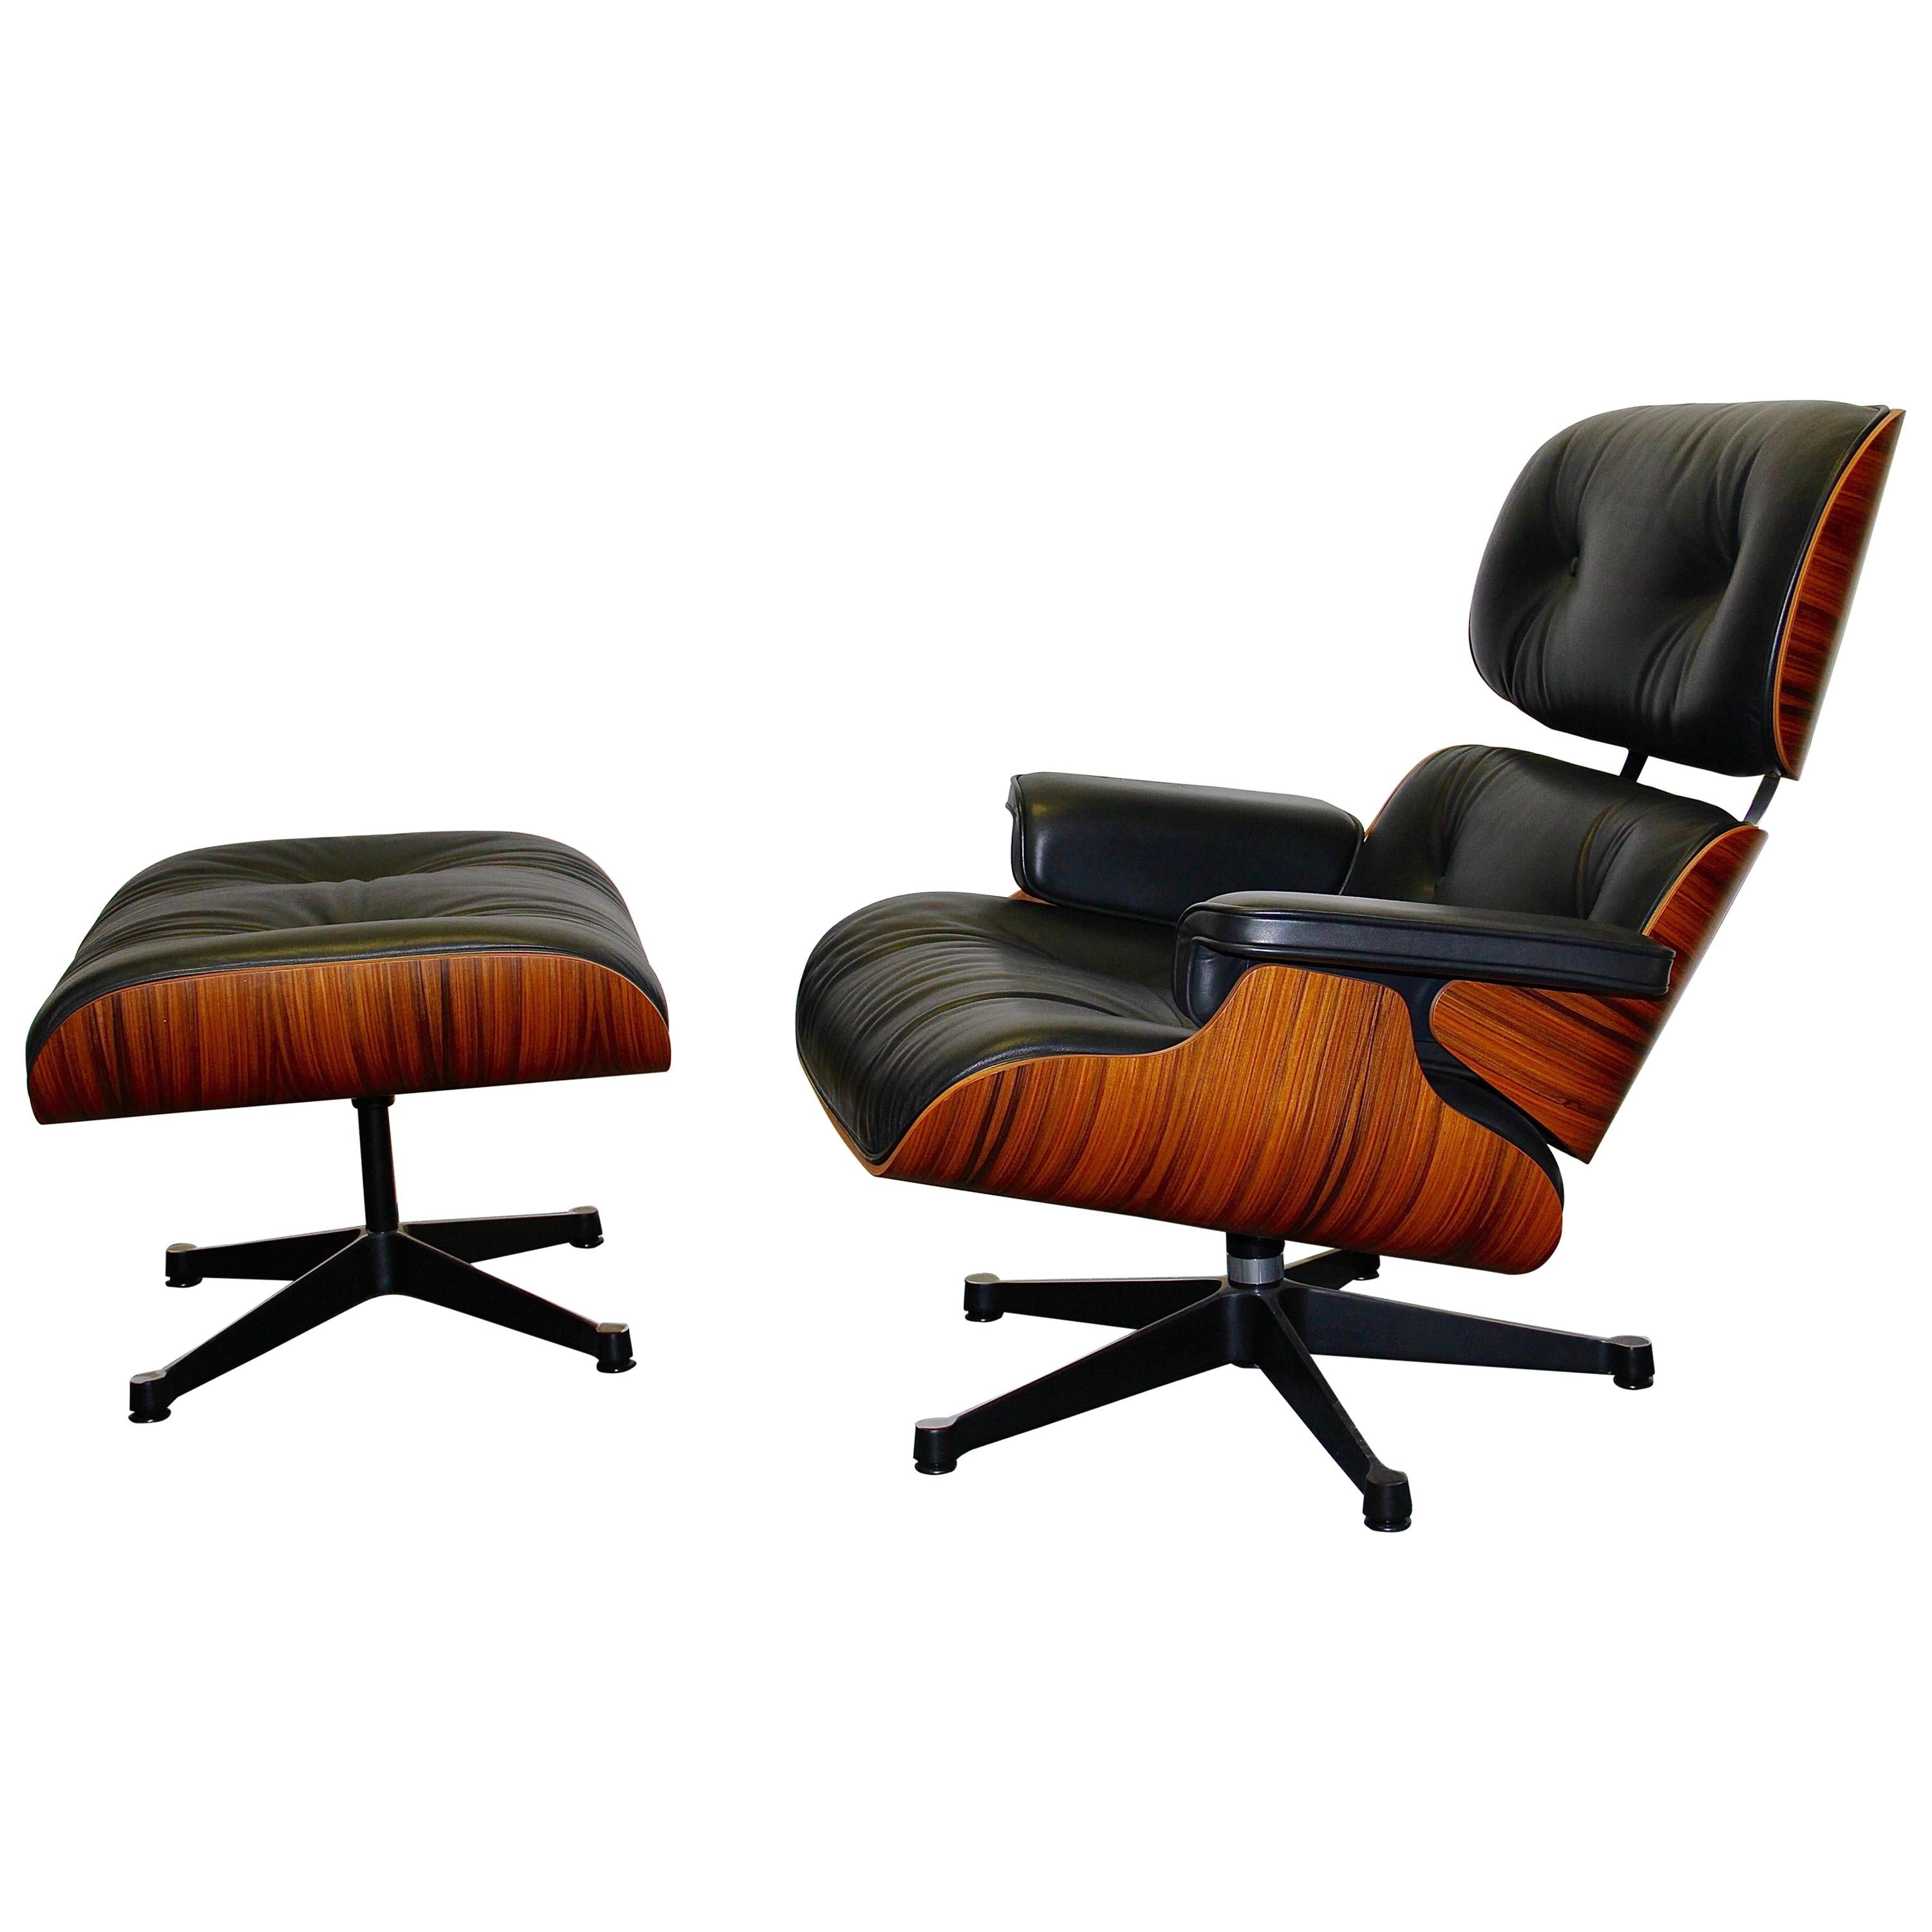 VITRA, Charles & Ray Eames Lounge Chair and Ottoman, limited Anniversary Edition